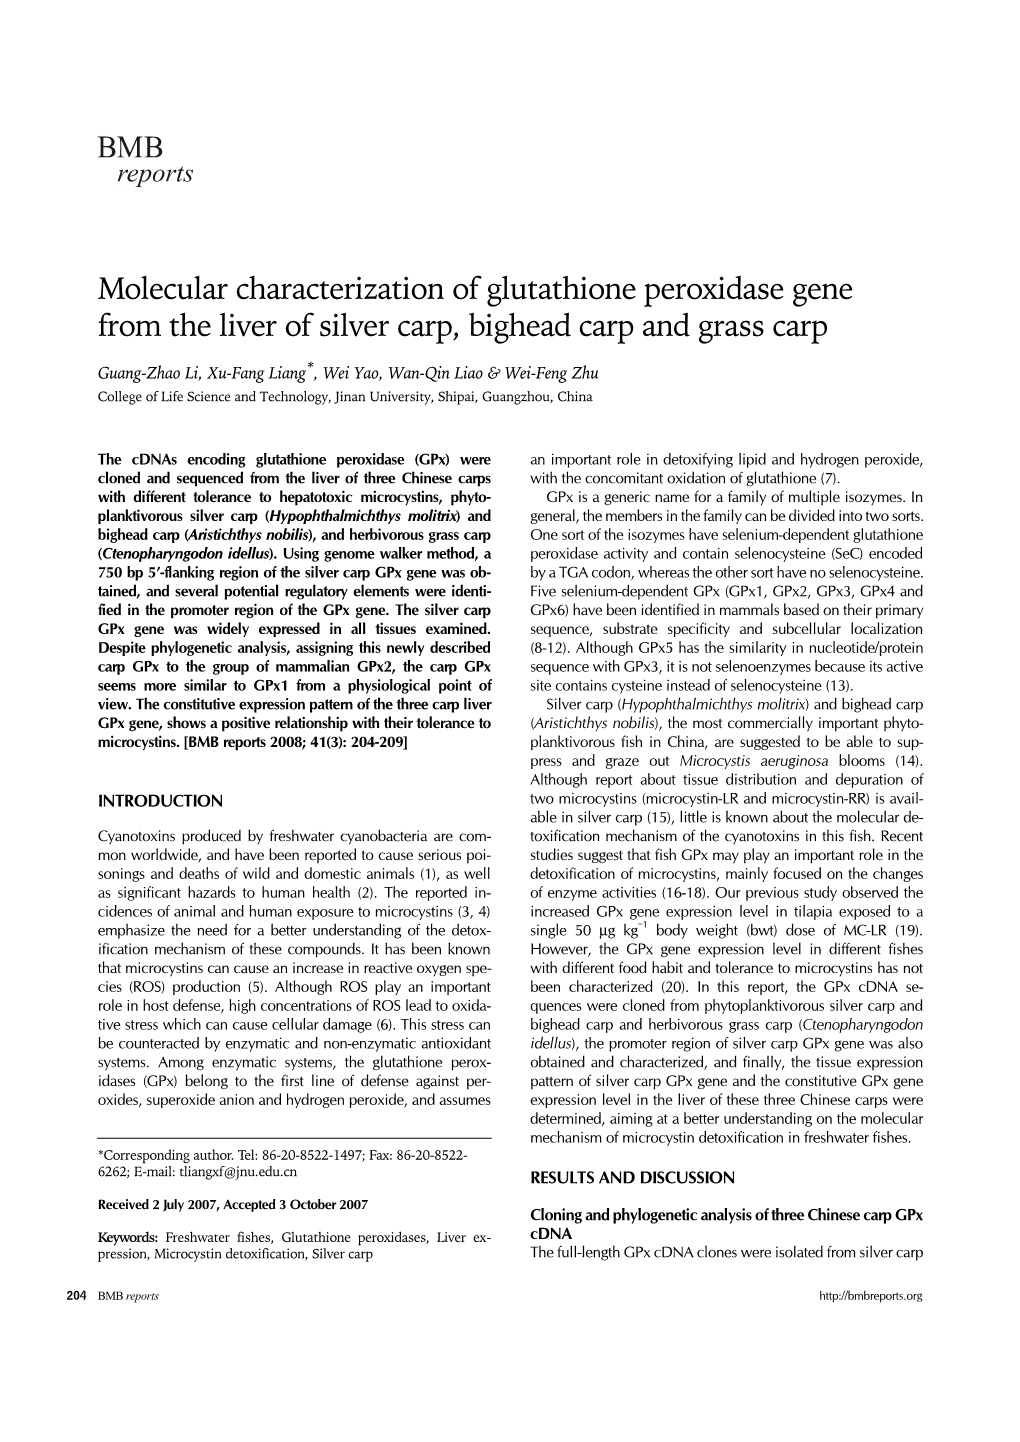 Molecular Characterization of Glutathione Peroxidase Gene from the Liver of Silver Carp, Bighead Carp and Grass Carp